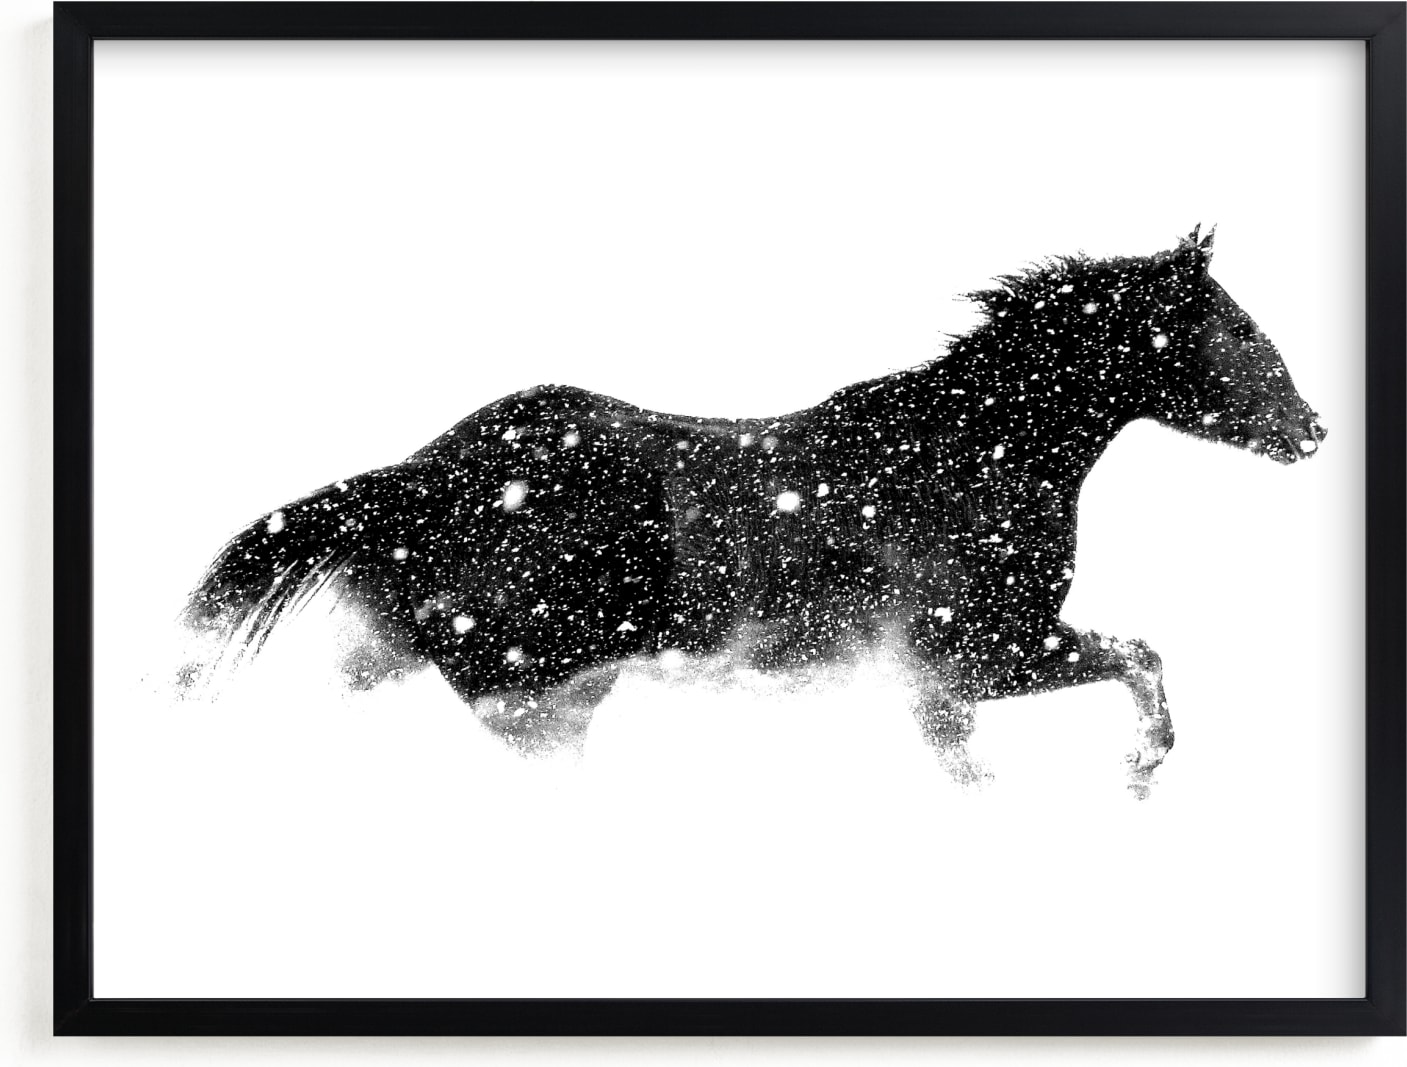 This is a white art by Leslie Le Coq called Snow Chaser.